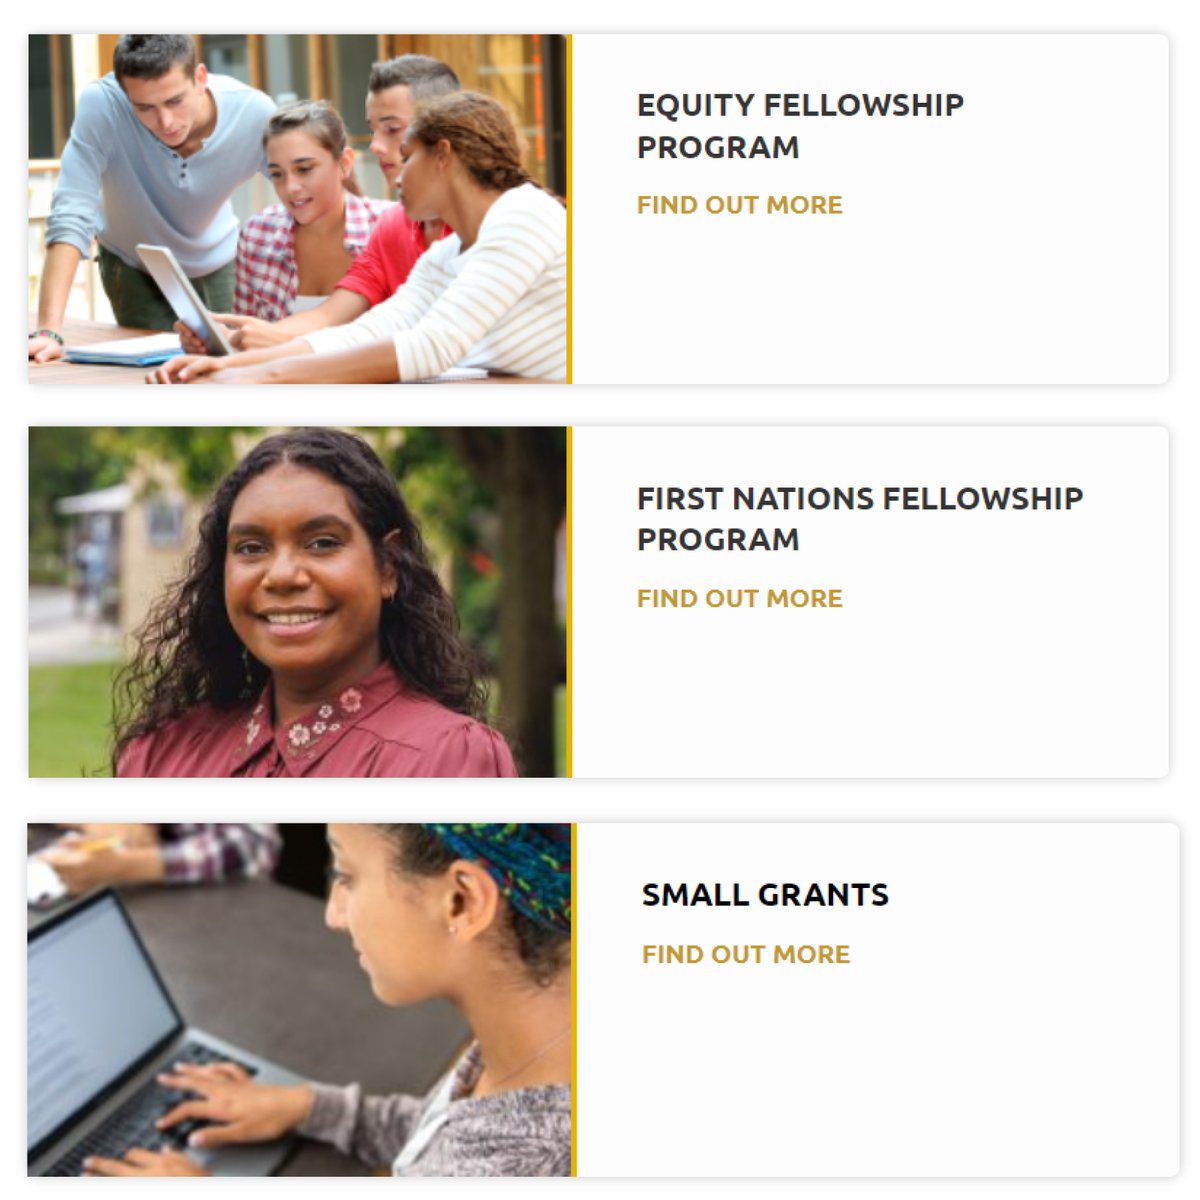 #BlastFromThePast | @NCSEHE is back and no longer running on fumes! 

Loving the #FirstNations Fellowship Program: 
ncsehe.edu.au/grants-and-fel… #ResearchGrants #StudentEquity #Fellowships #HigherEd